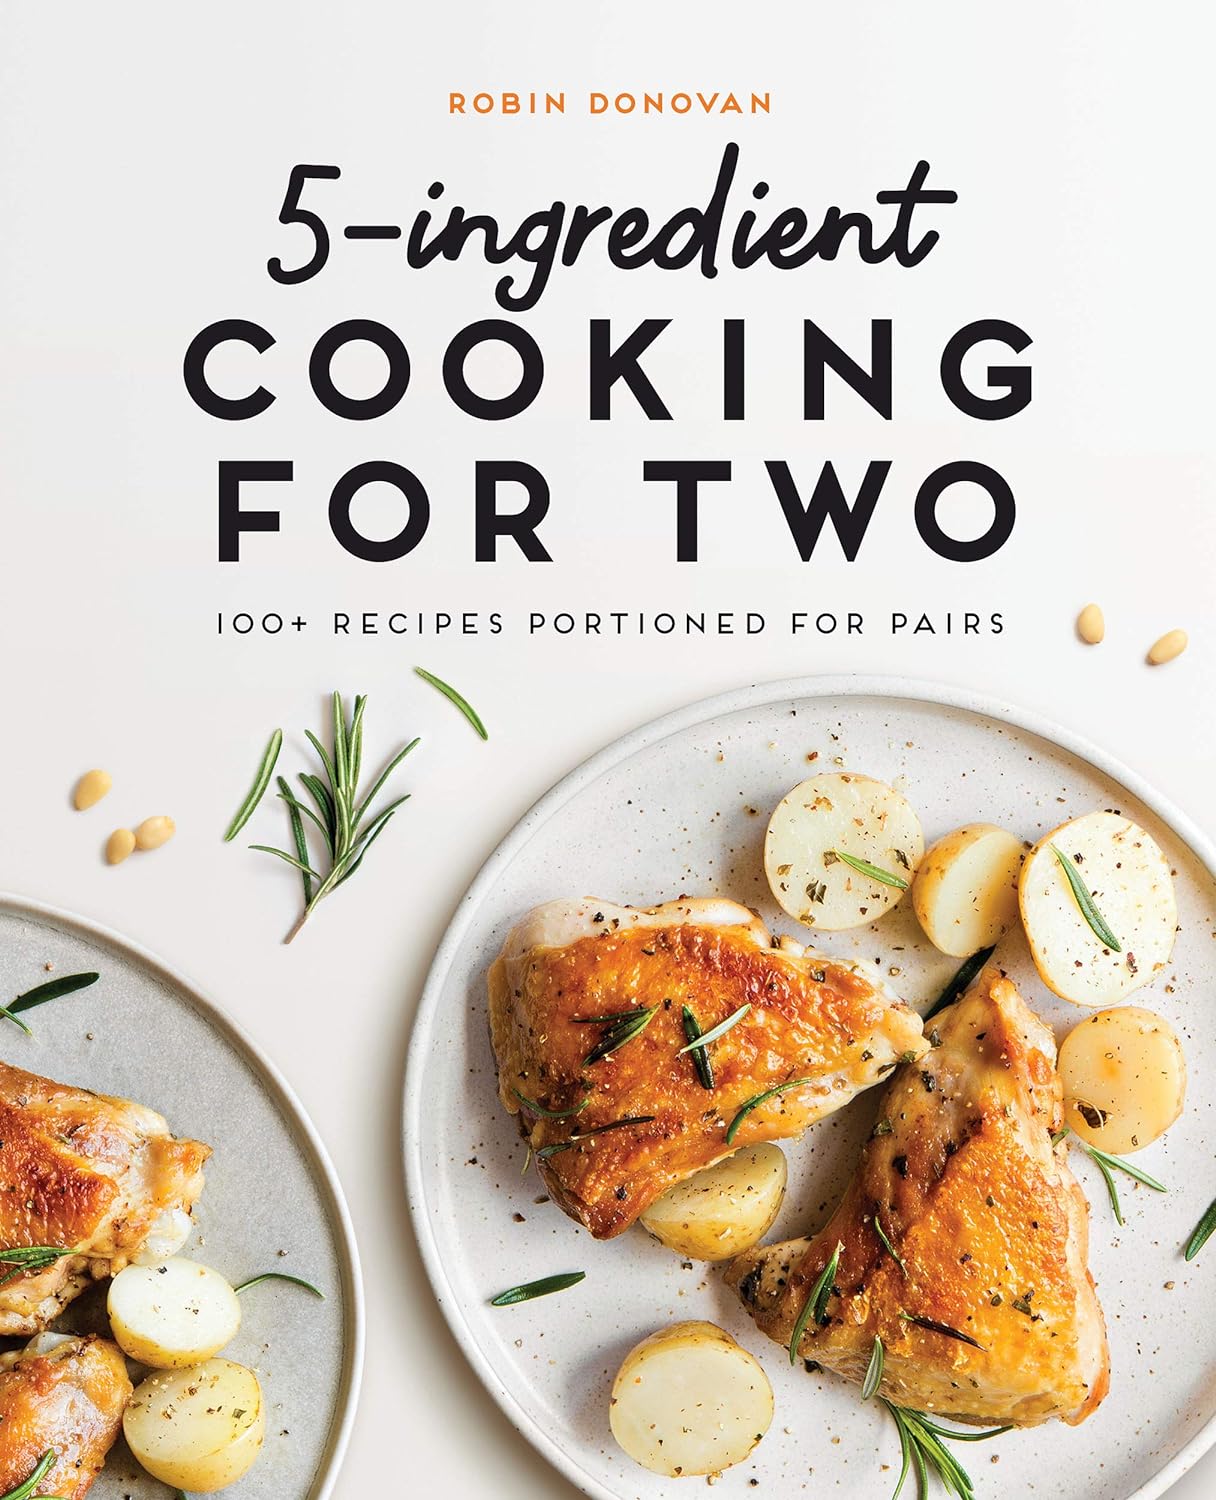 5-Ingredient Cooking for Two: 100 Recipes Portioned for Pairs     Kindle Edition